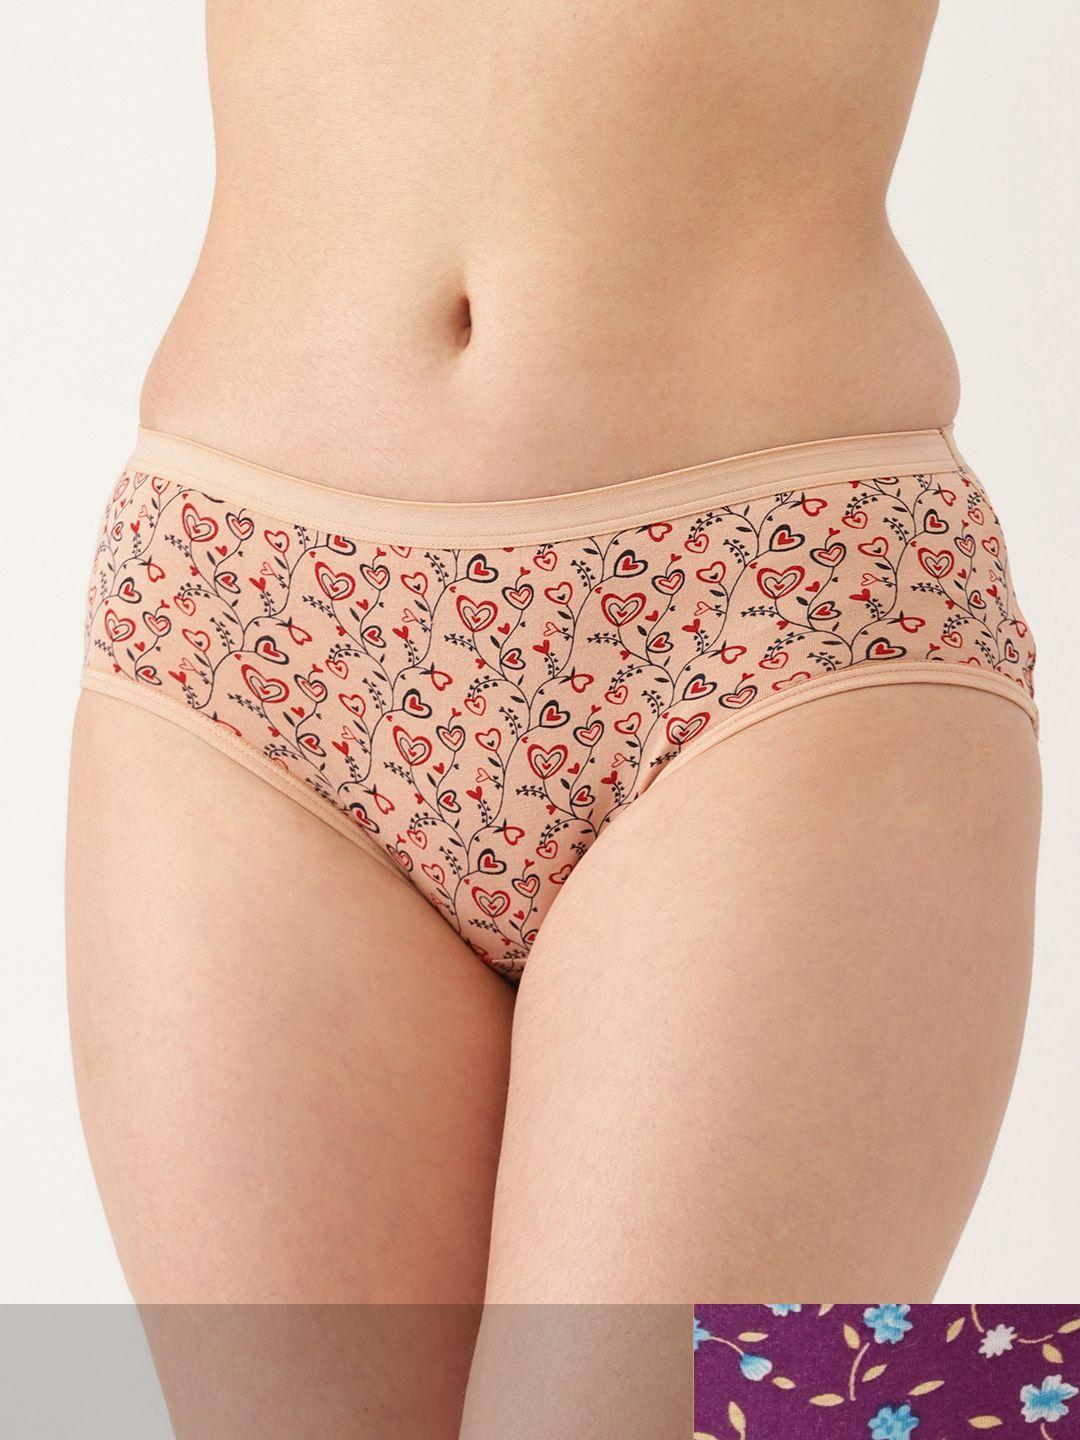 ms.lingies women pack of 2 floral printed hipster briefs msp094s